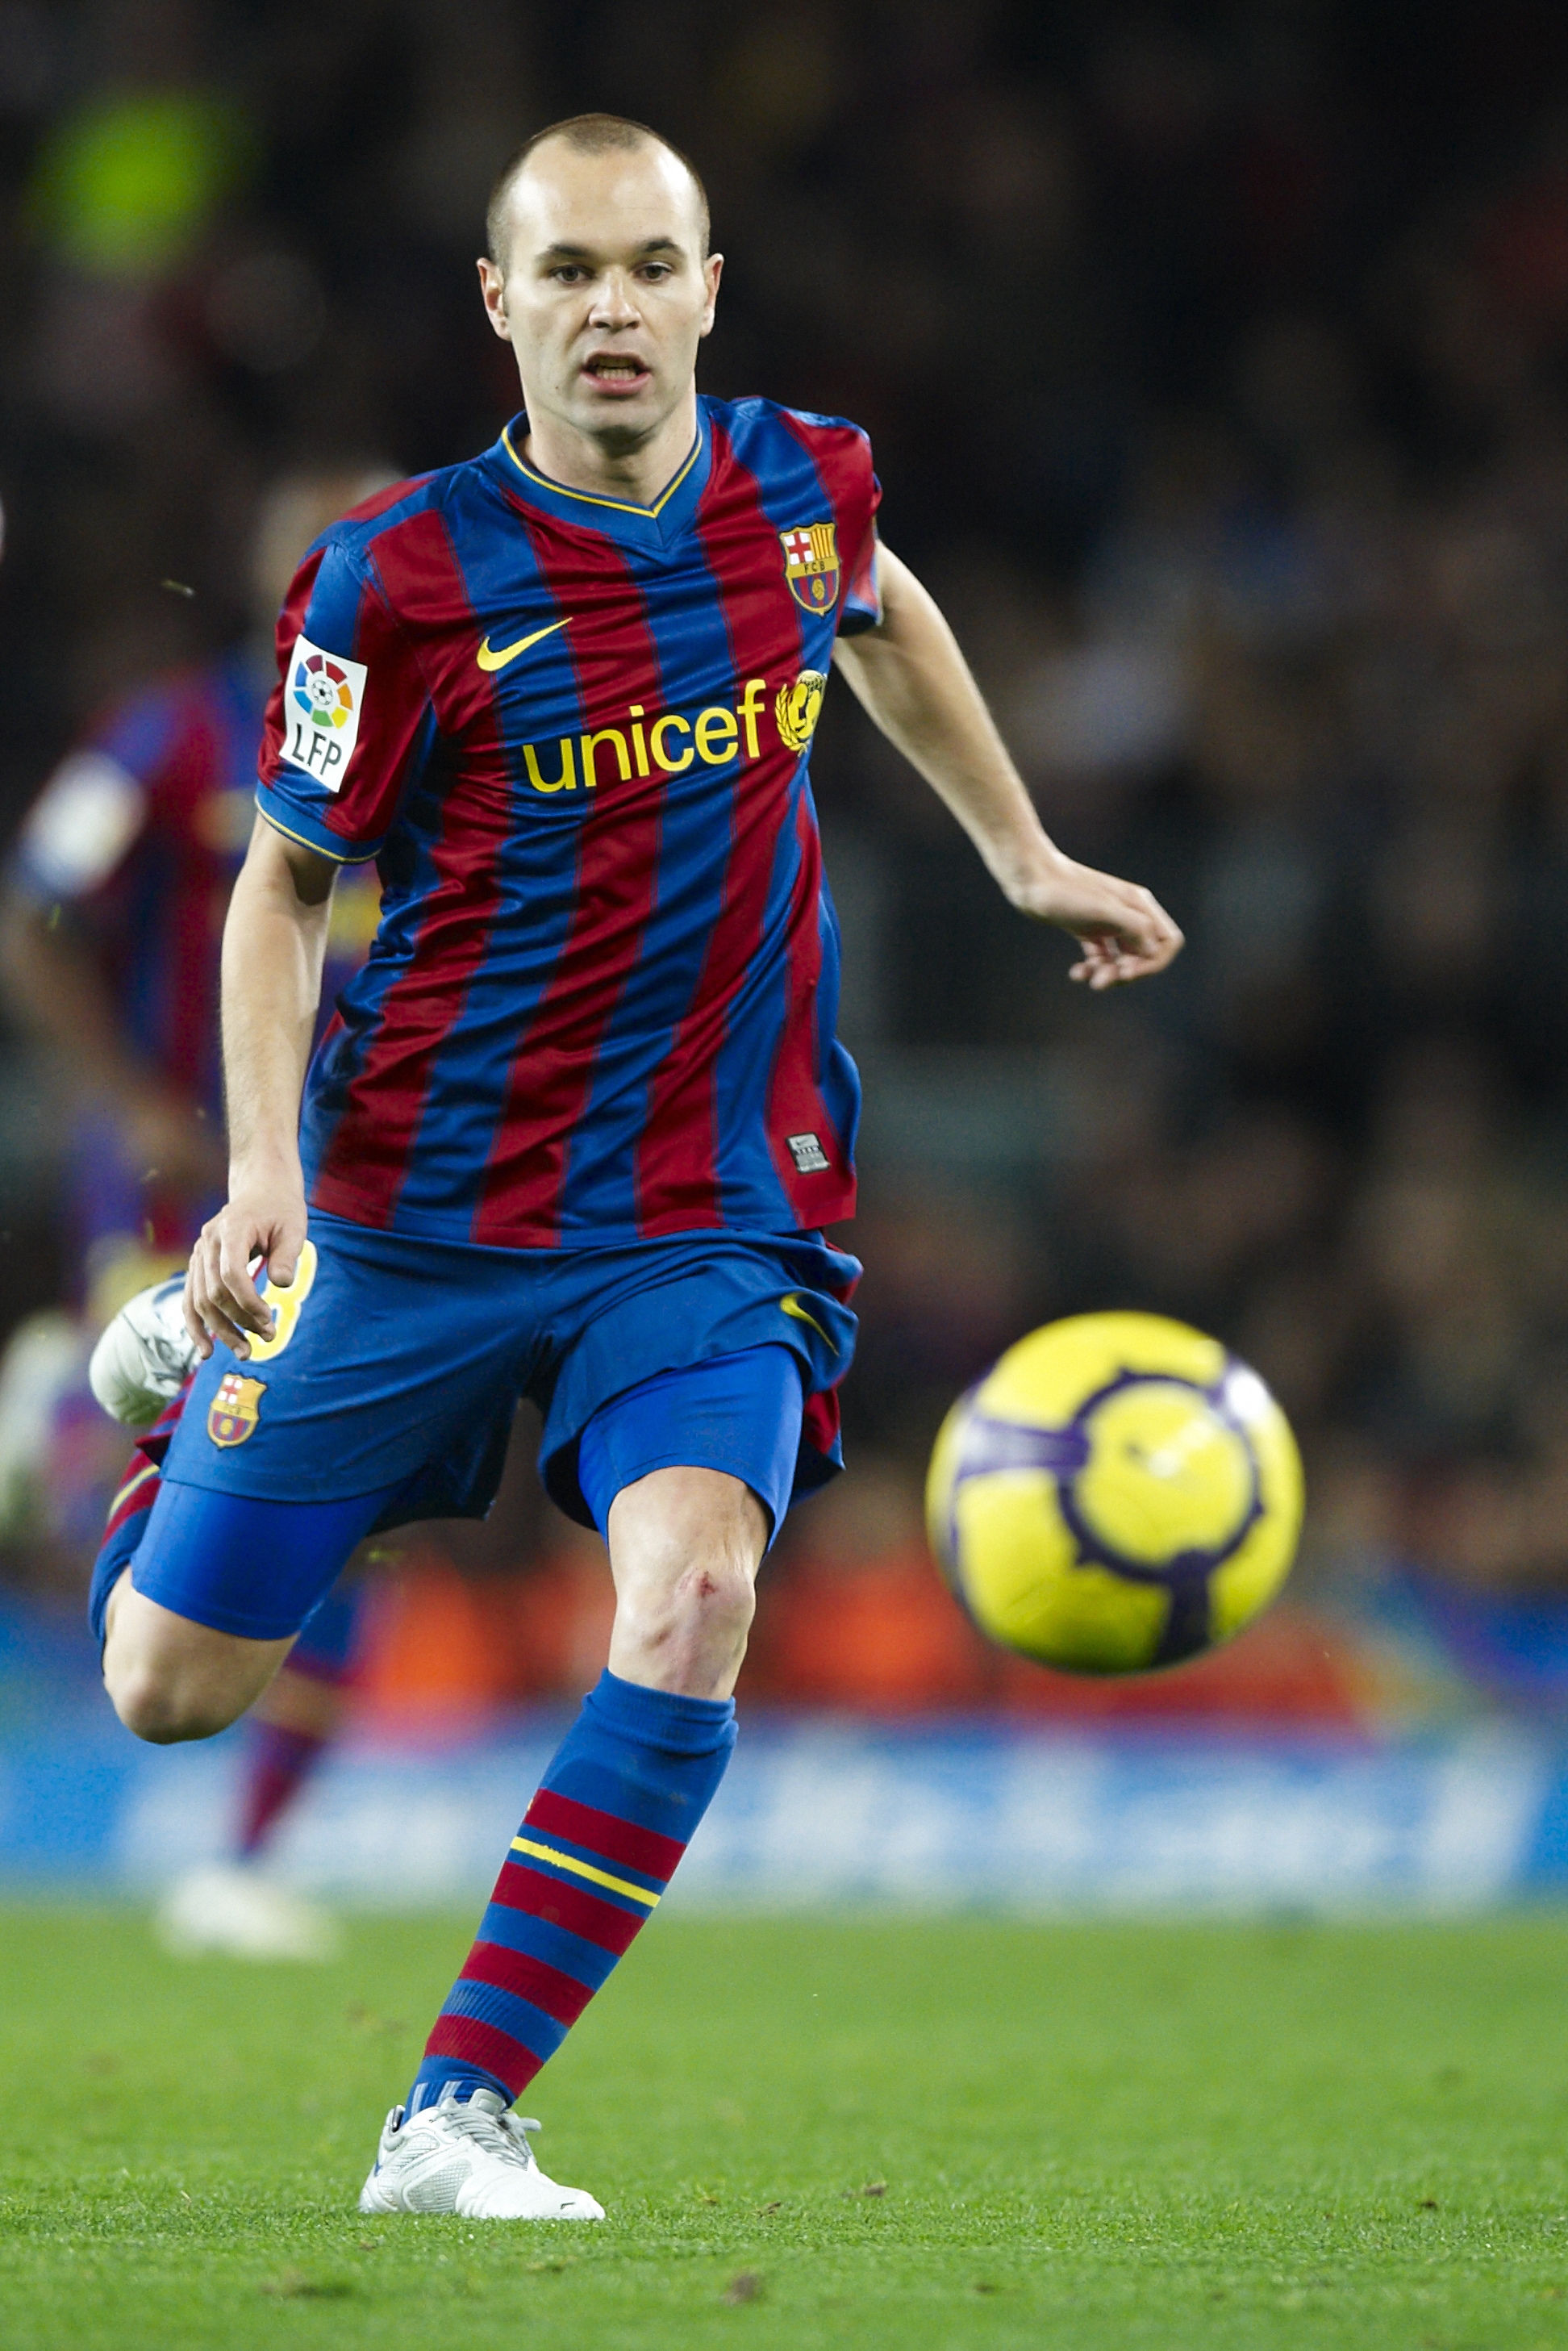 BARCELONA, SPAIN - FEBRUARY 06:  Andres Iniesta of FC Barcelona in action during the La Liga match between Barcelona and Getafe at Camp Nou on February 6, 2010 in Barcelona, Spain. Barcelona won 2-1.  (Photo by Manuel Queimadelos Alonso/Getty Images)